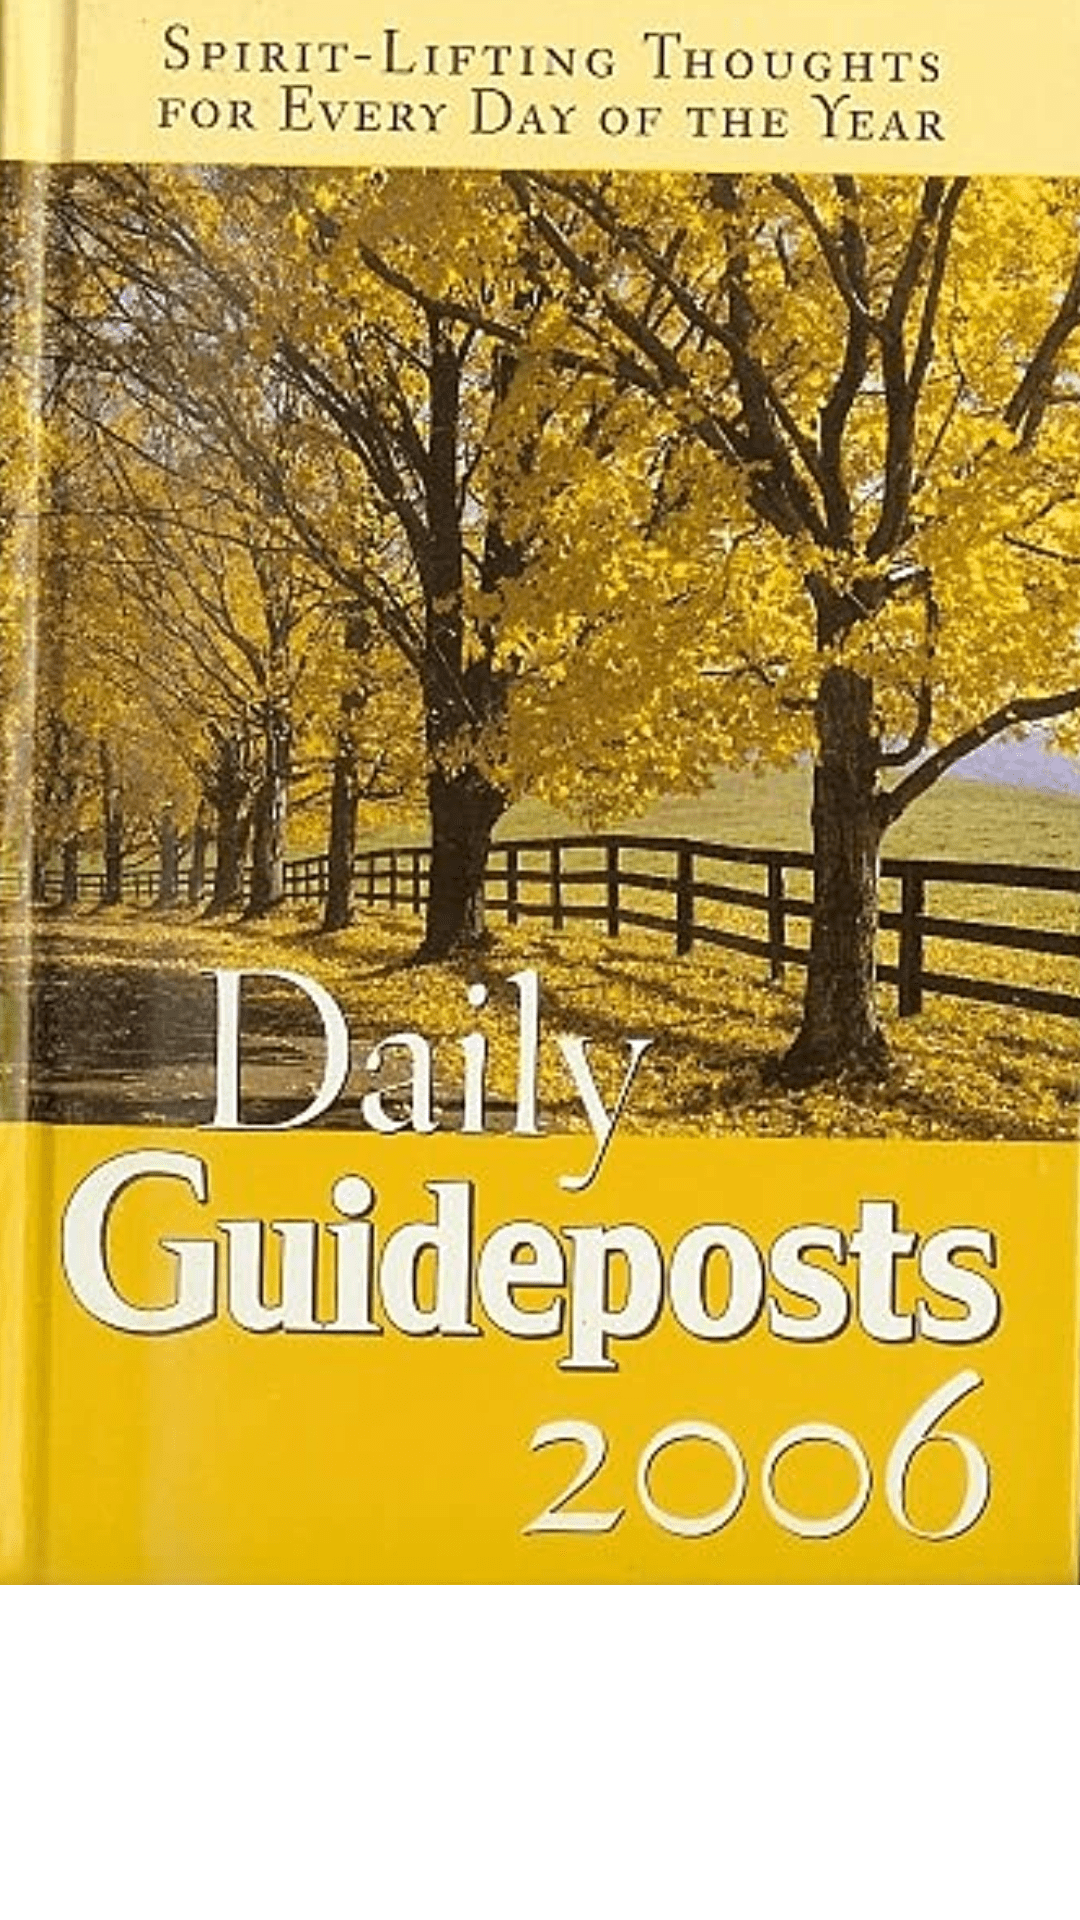 Daily Guideposts 2006 ~ Spirit-lifting Thoughts for Every Day of the Year